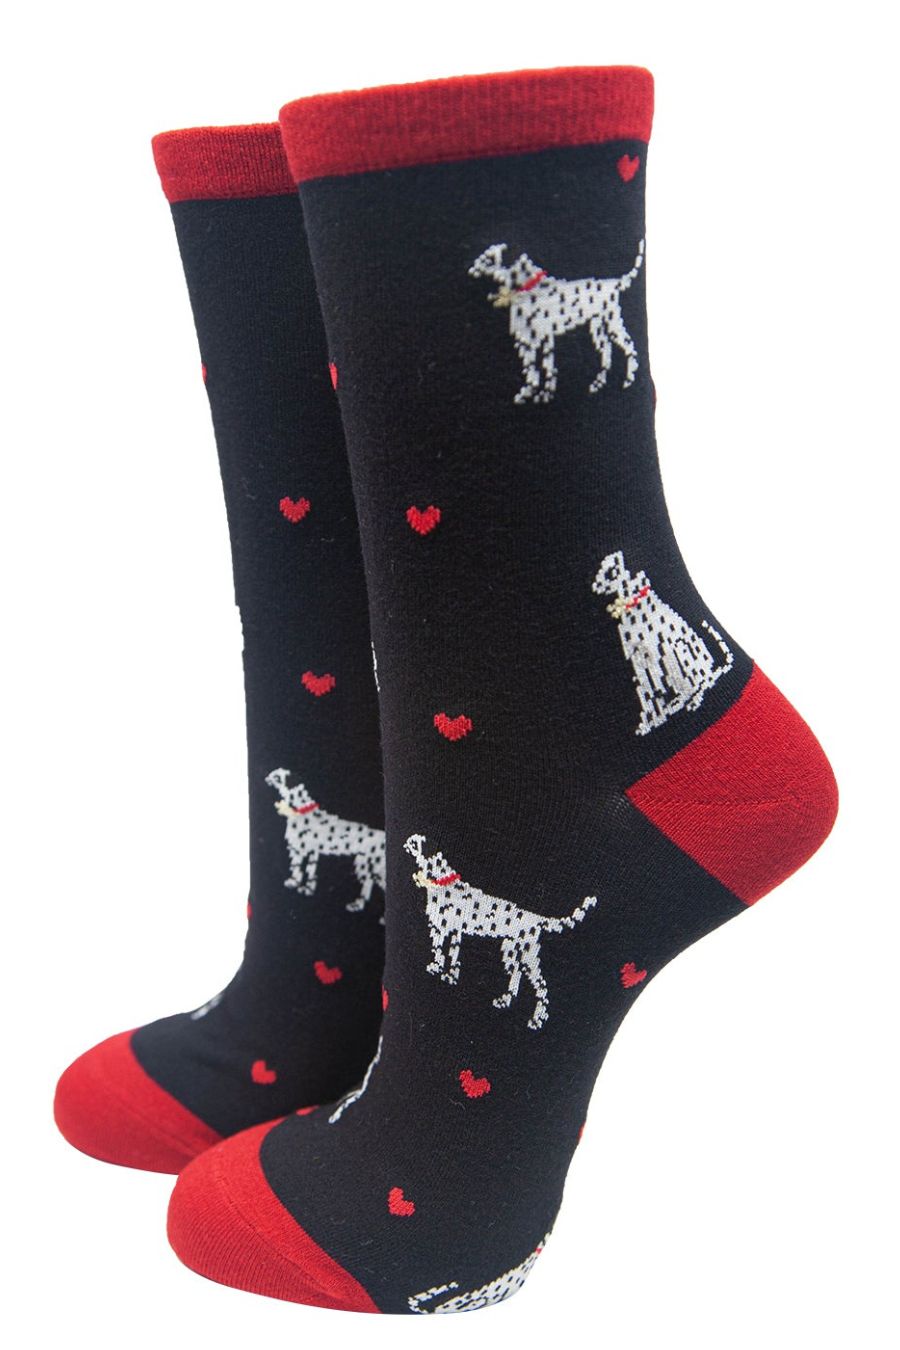 black ankle socks with red love hearts and dalmatian dogs